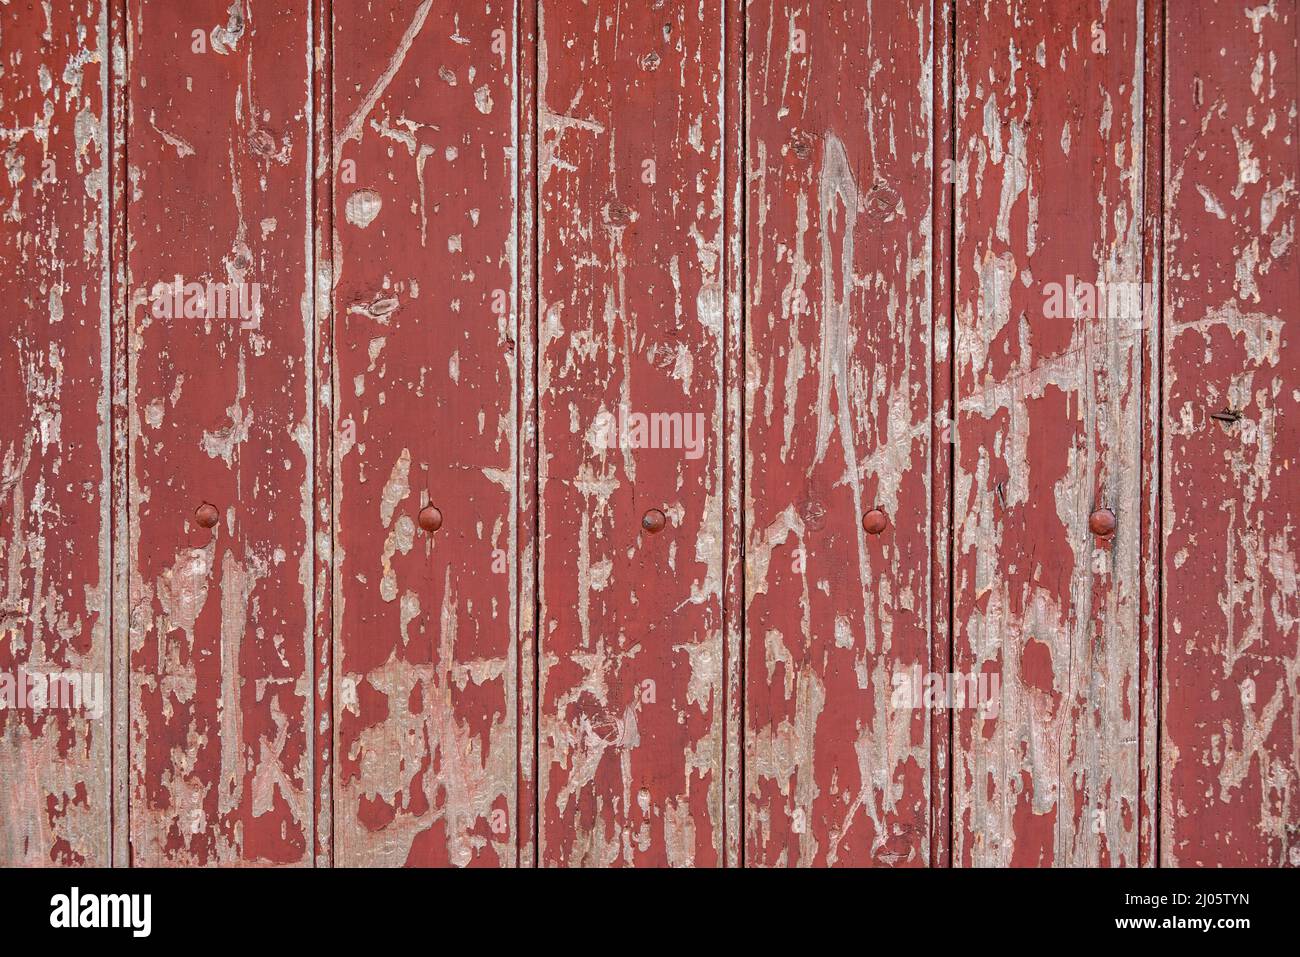 Rough background texture, showing a weathered and scratched wooden door  with peeling red paint and exposed wooden boards underneath Stock Photo -  Alamy